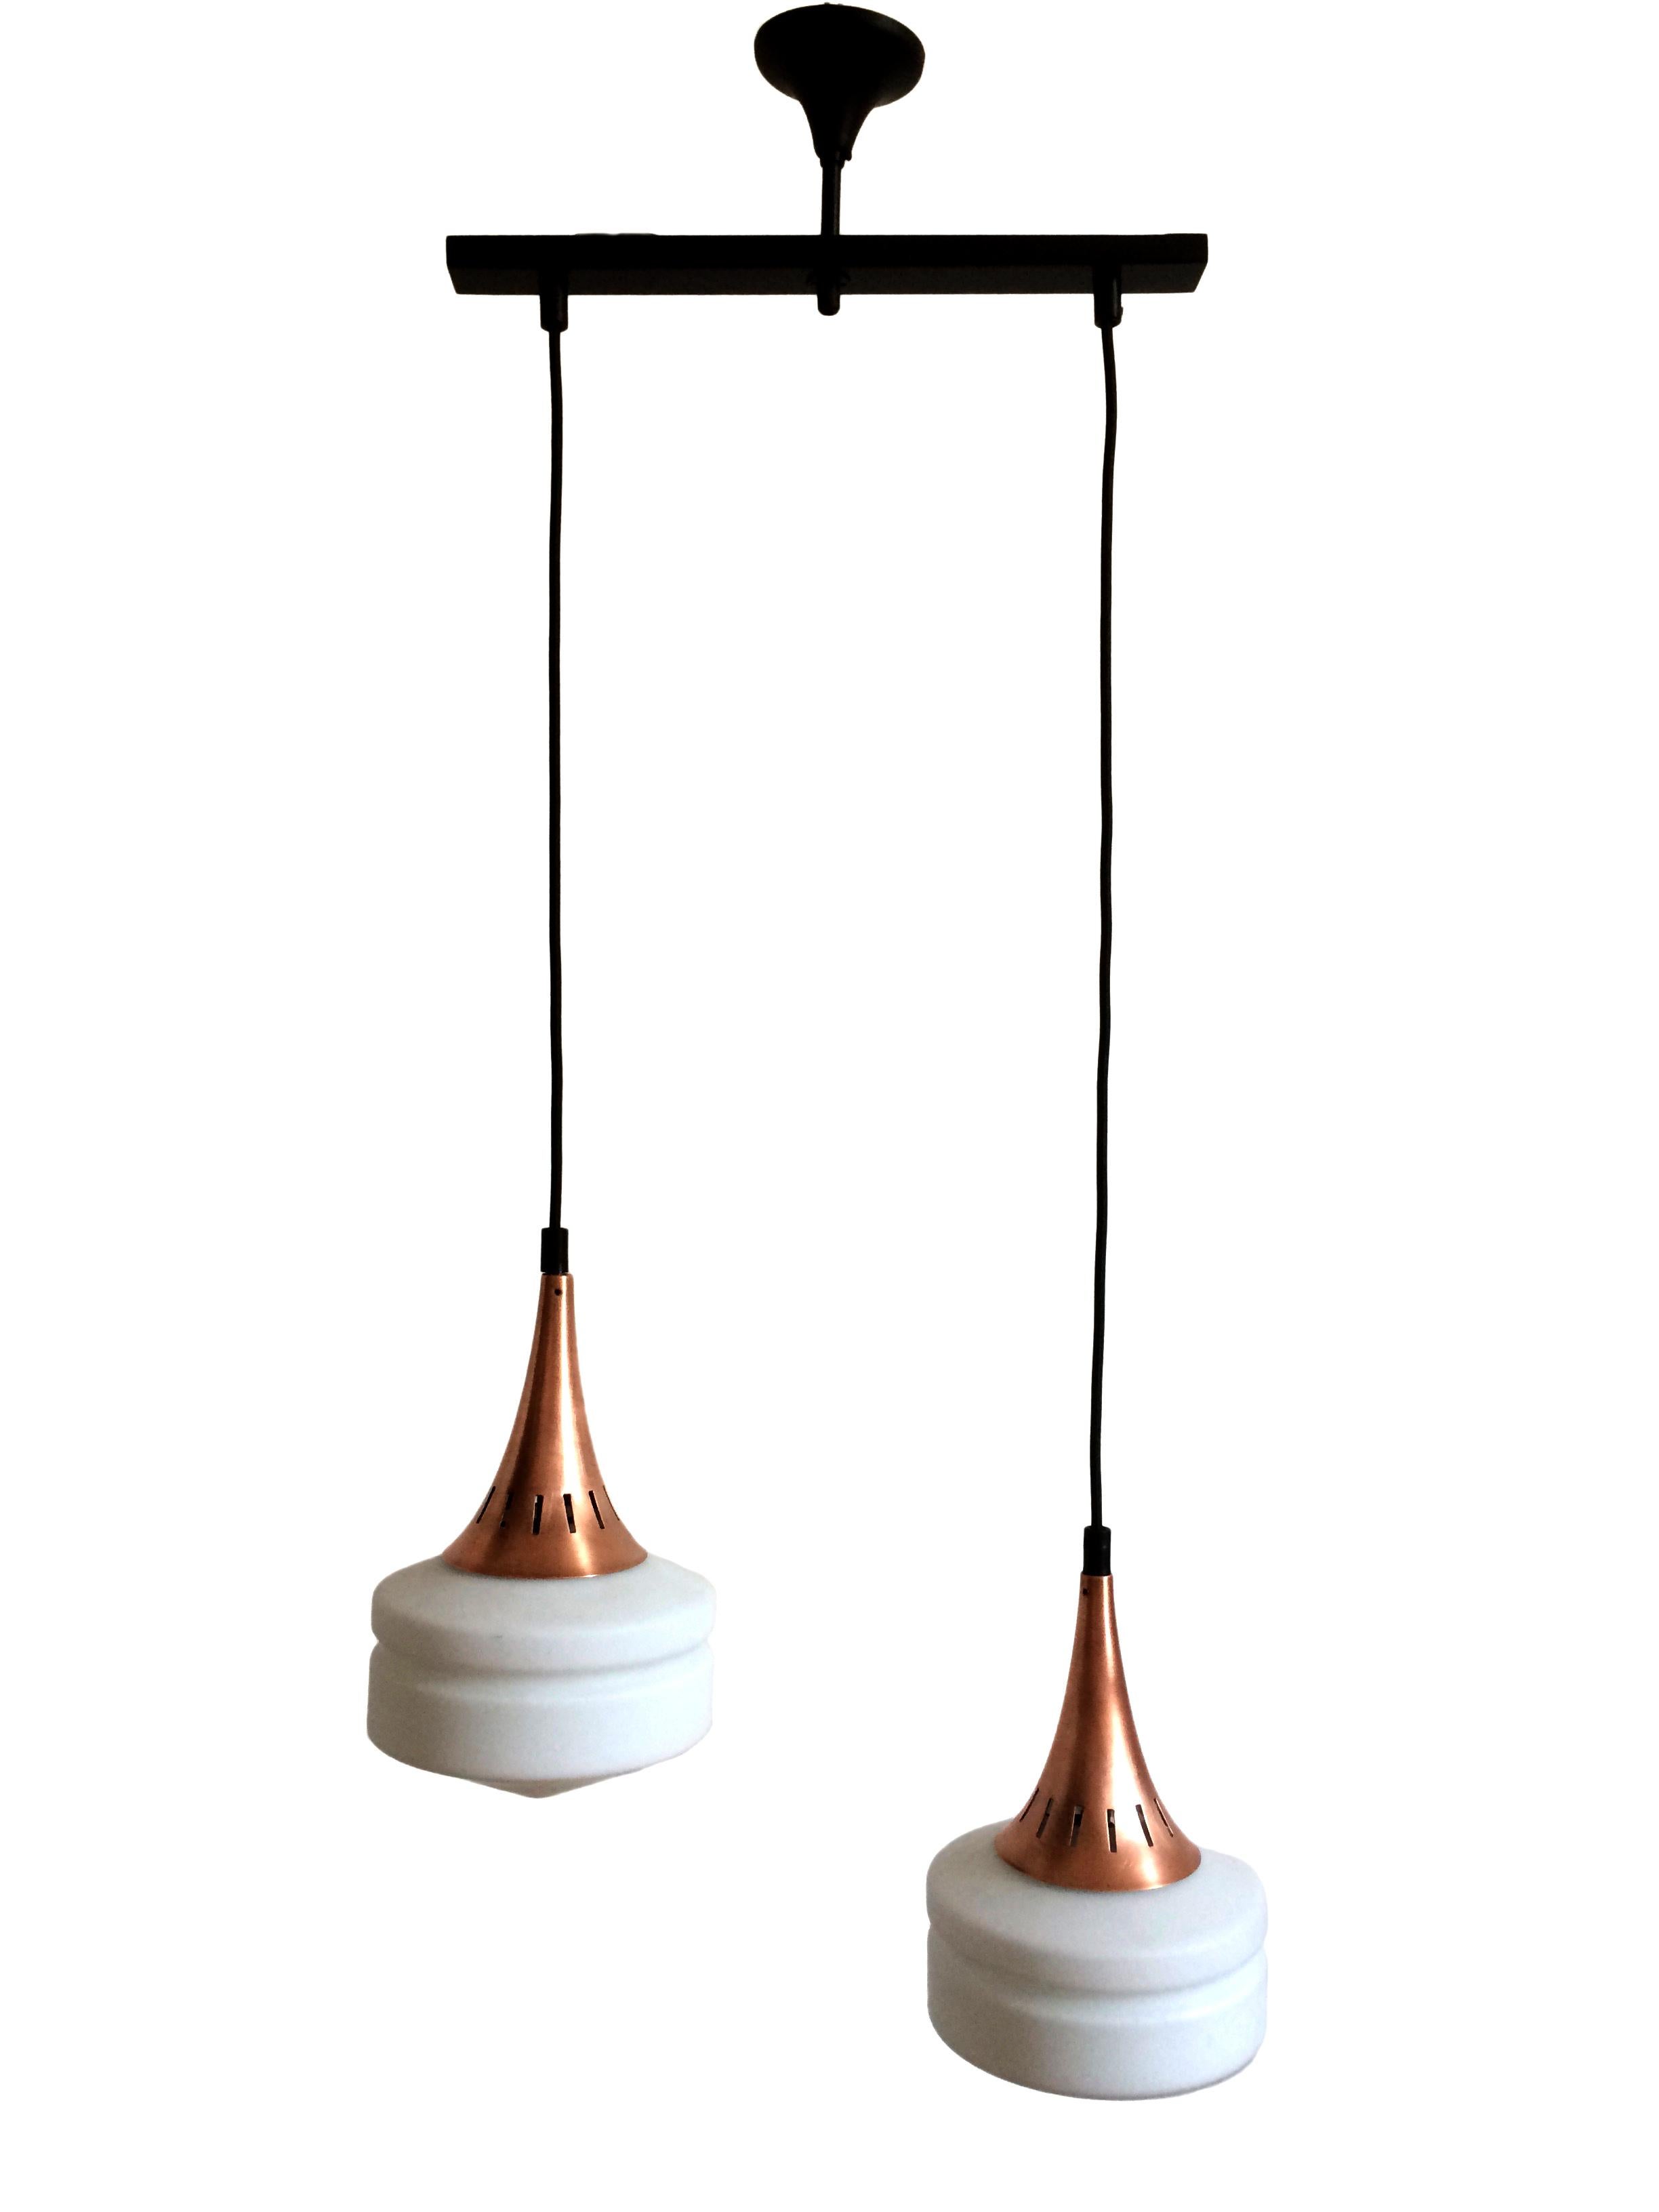 Ceiling lamp attributed to Stilnovo. Double milk-white opal glass diffuser. Copper, brass and black iron frame.

Italian pendant lamp, attributed to Stilnovo . Copper, brass and black iron structure. Two white opal glass lamp shades.  

Dim.  h110 X